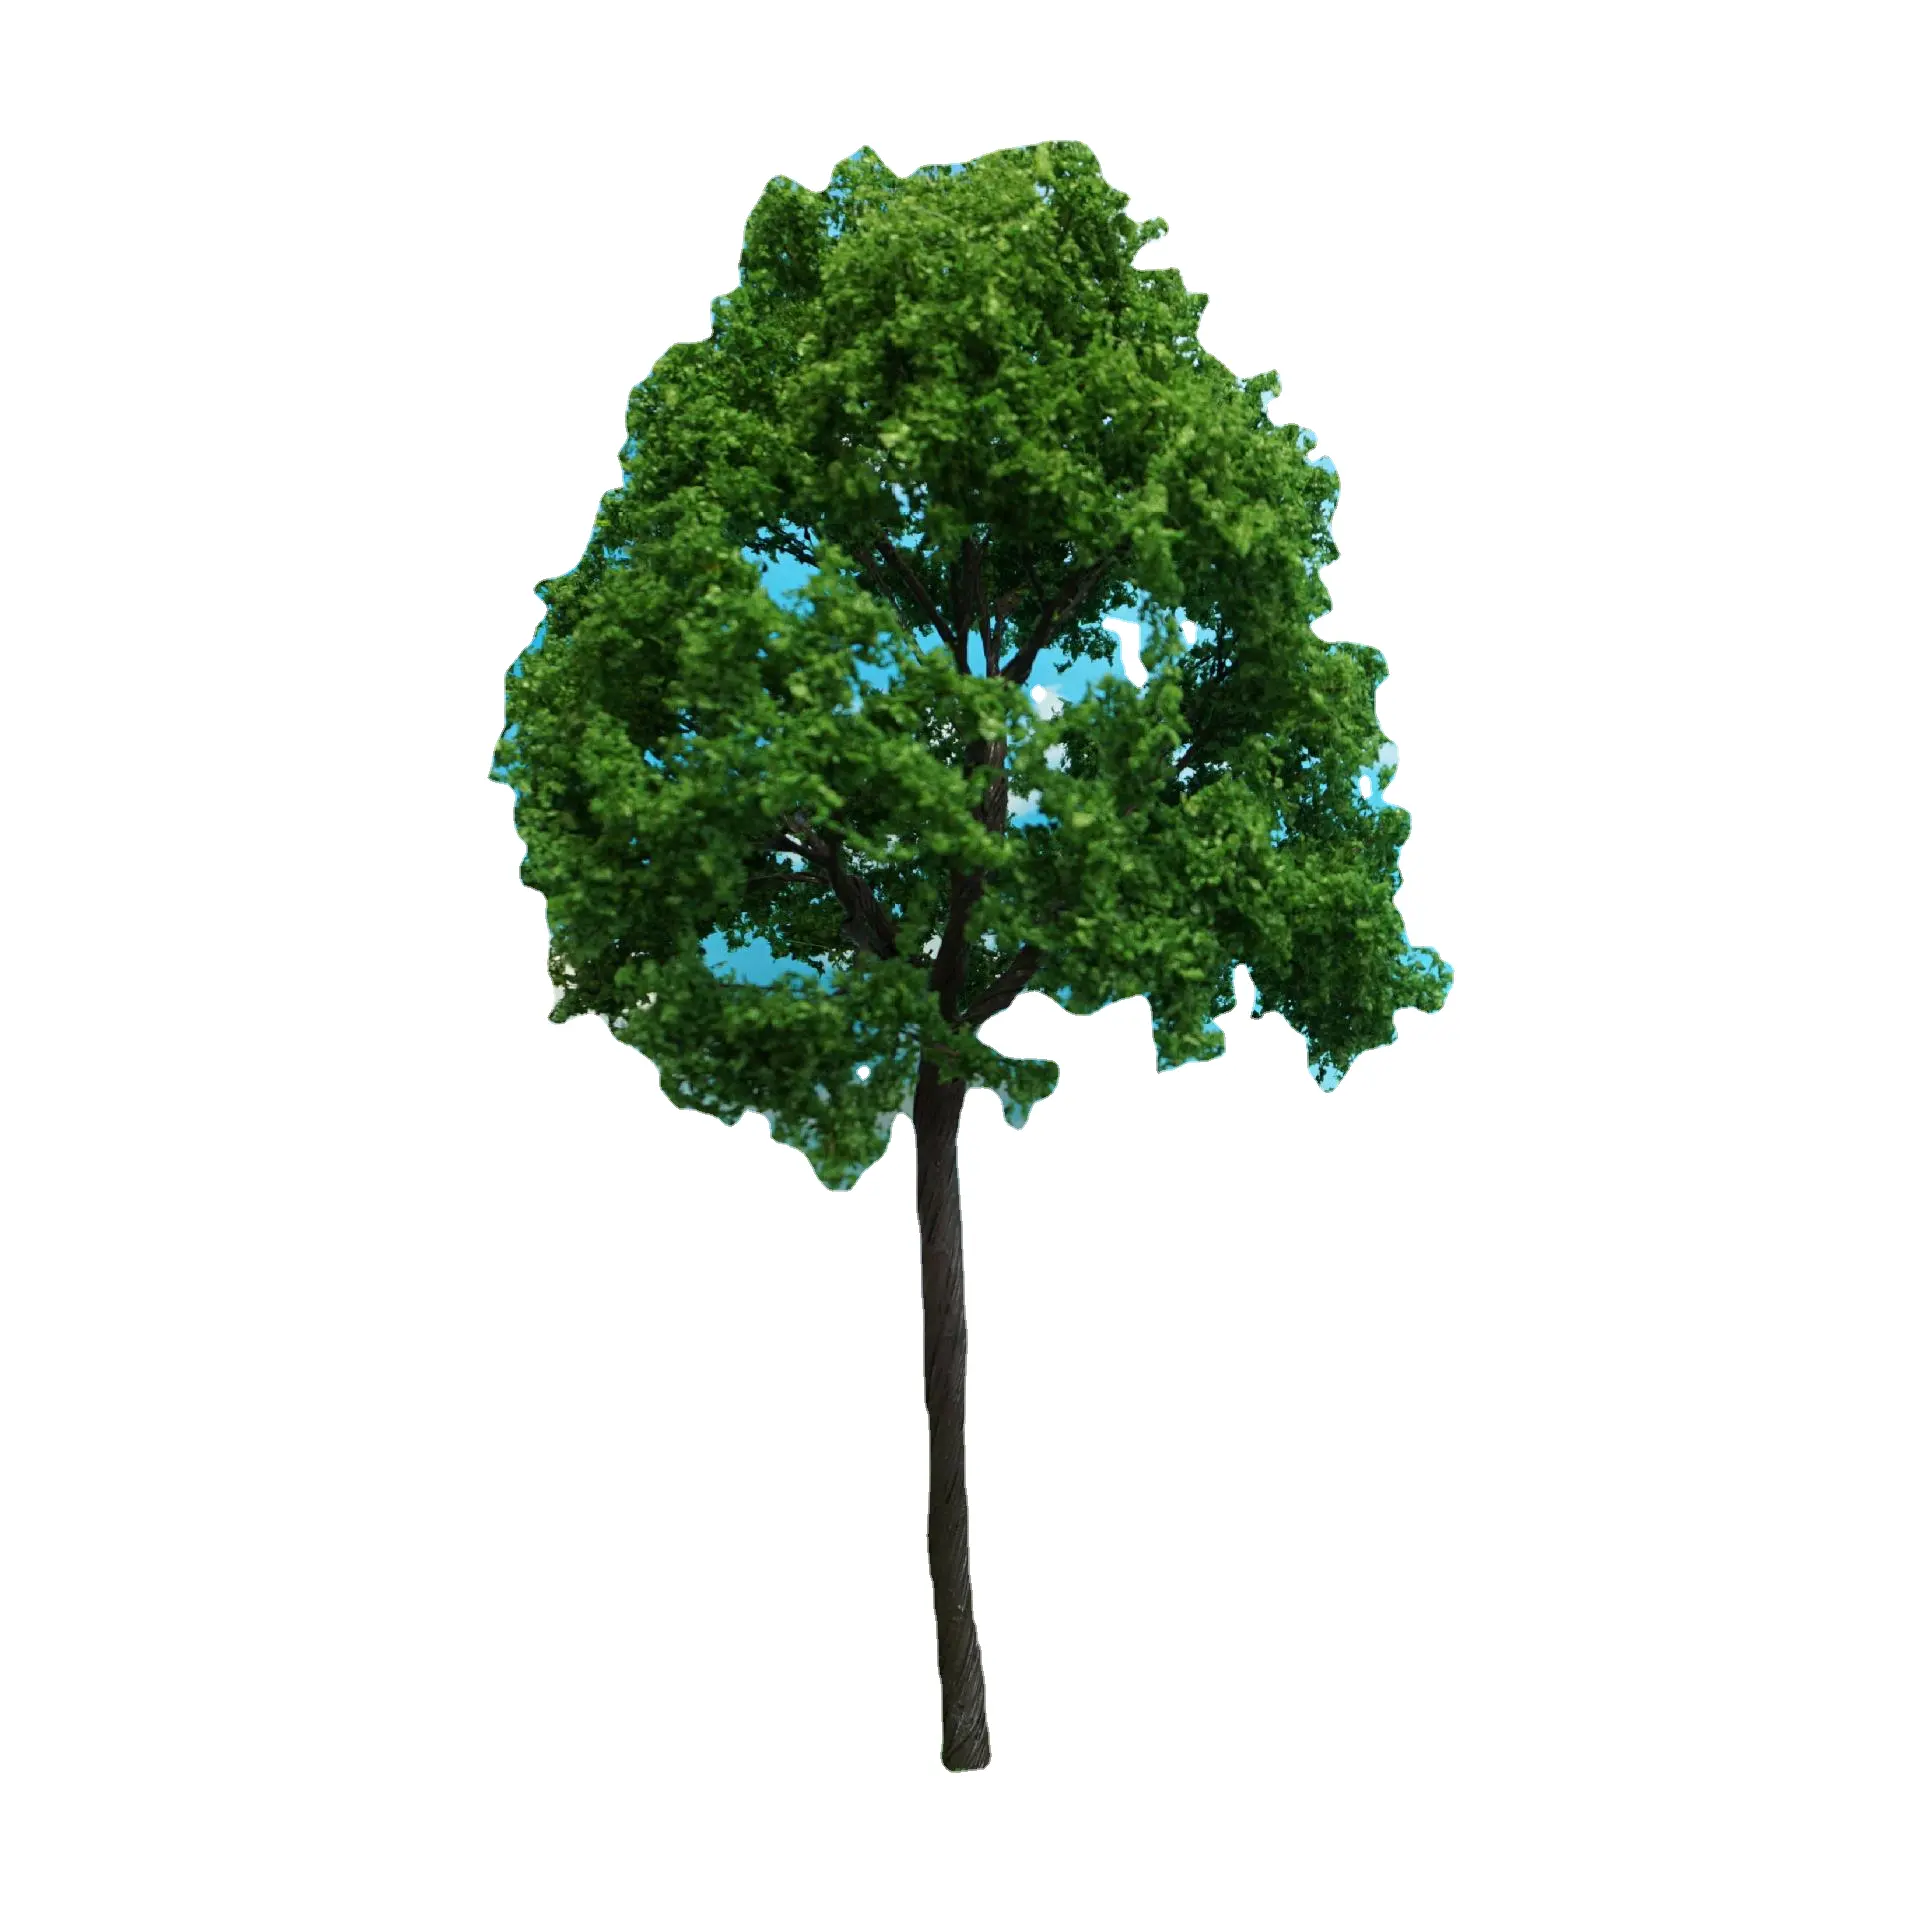 HY senlin craft simulates large wire tree decoration and lscaping Green plant -18